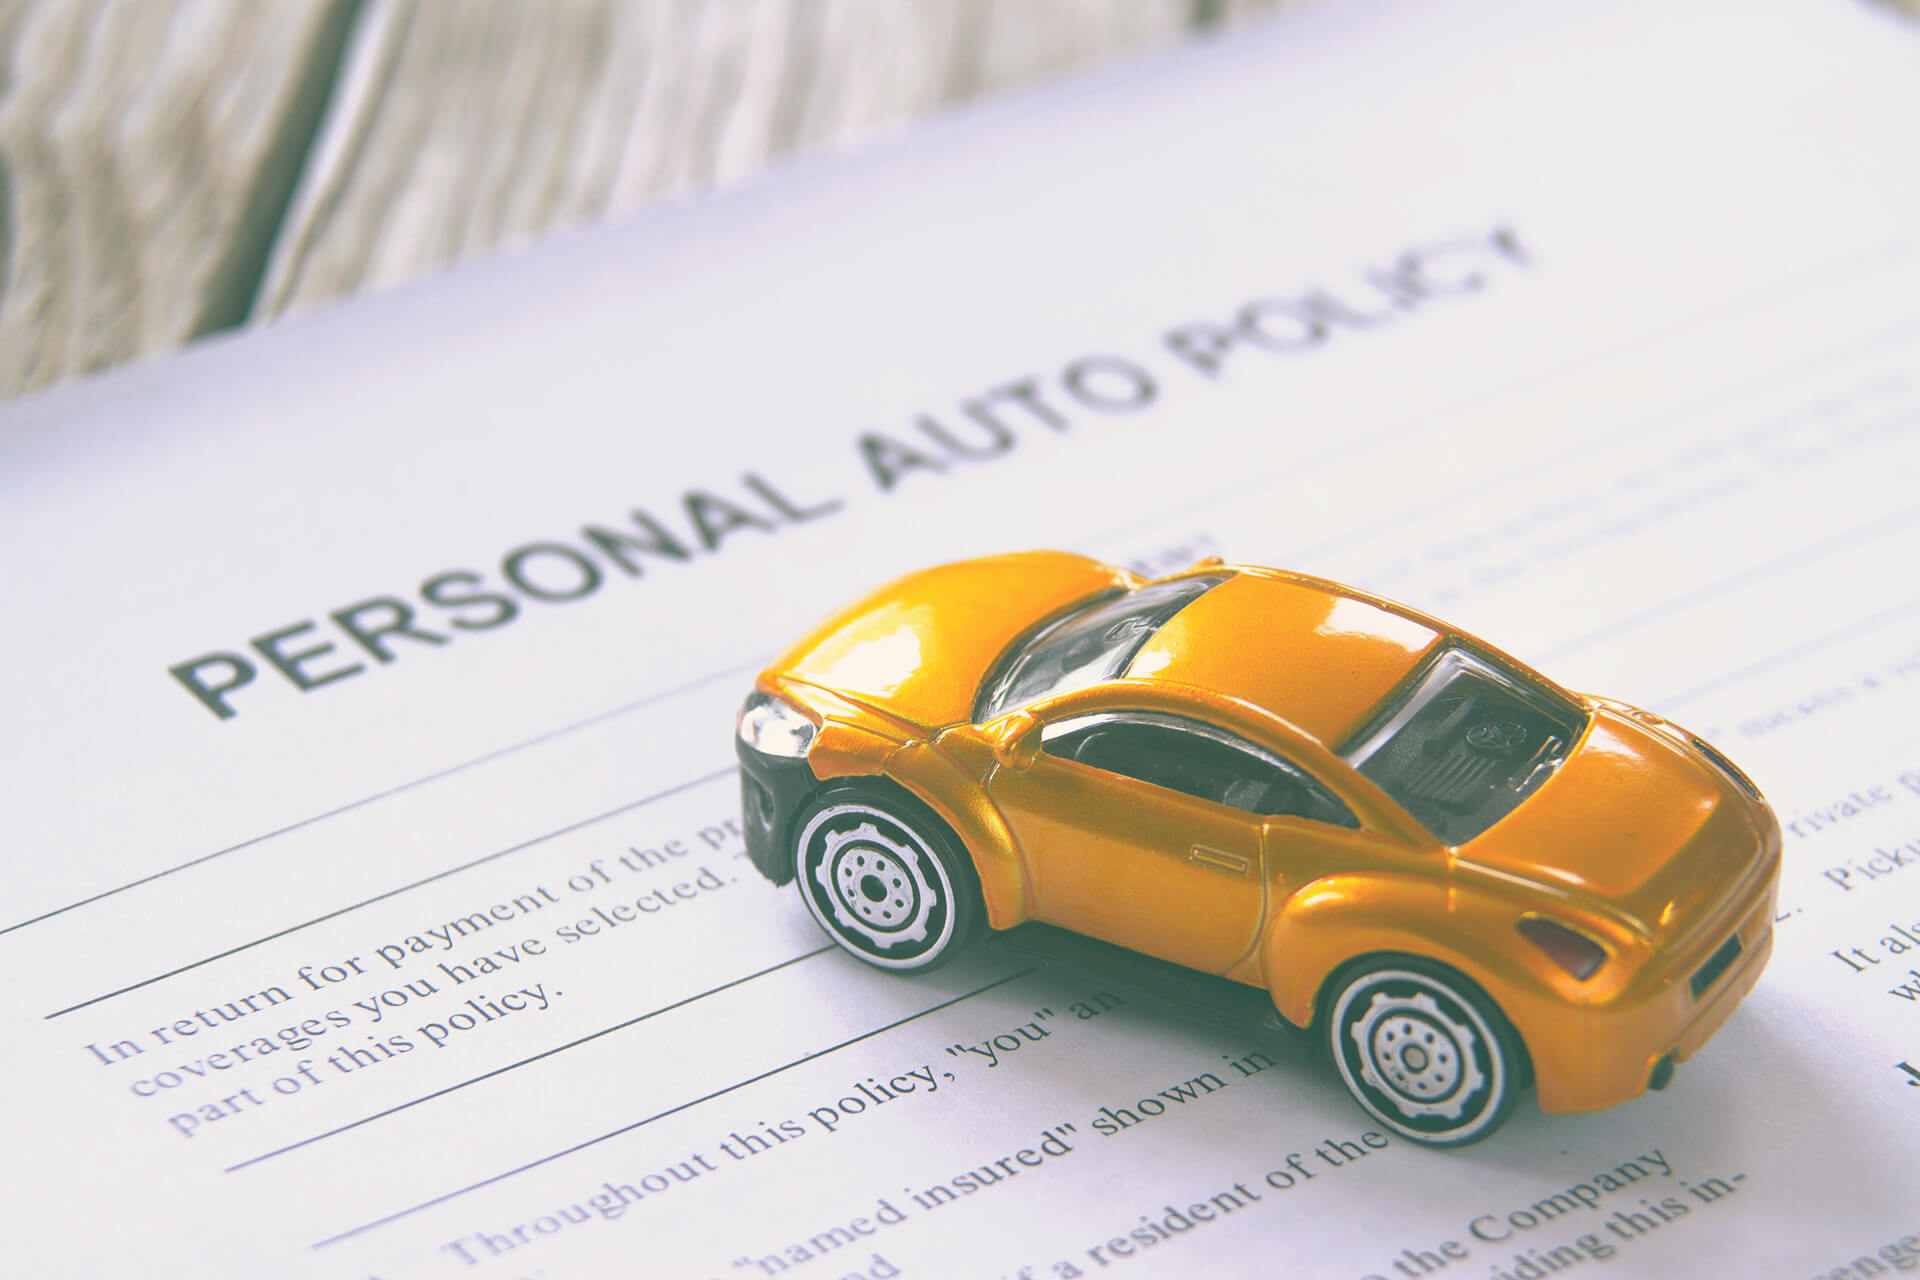 Personal auto insurance policy free image download